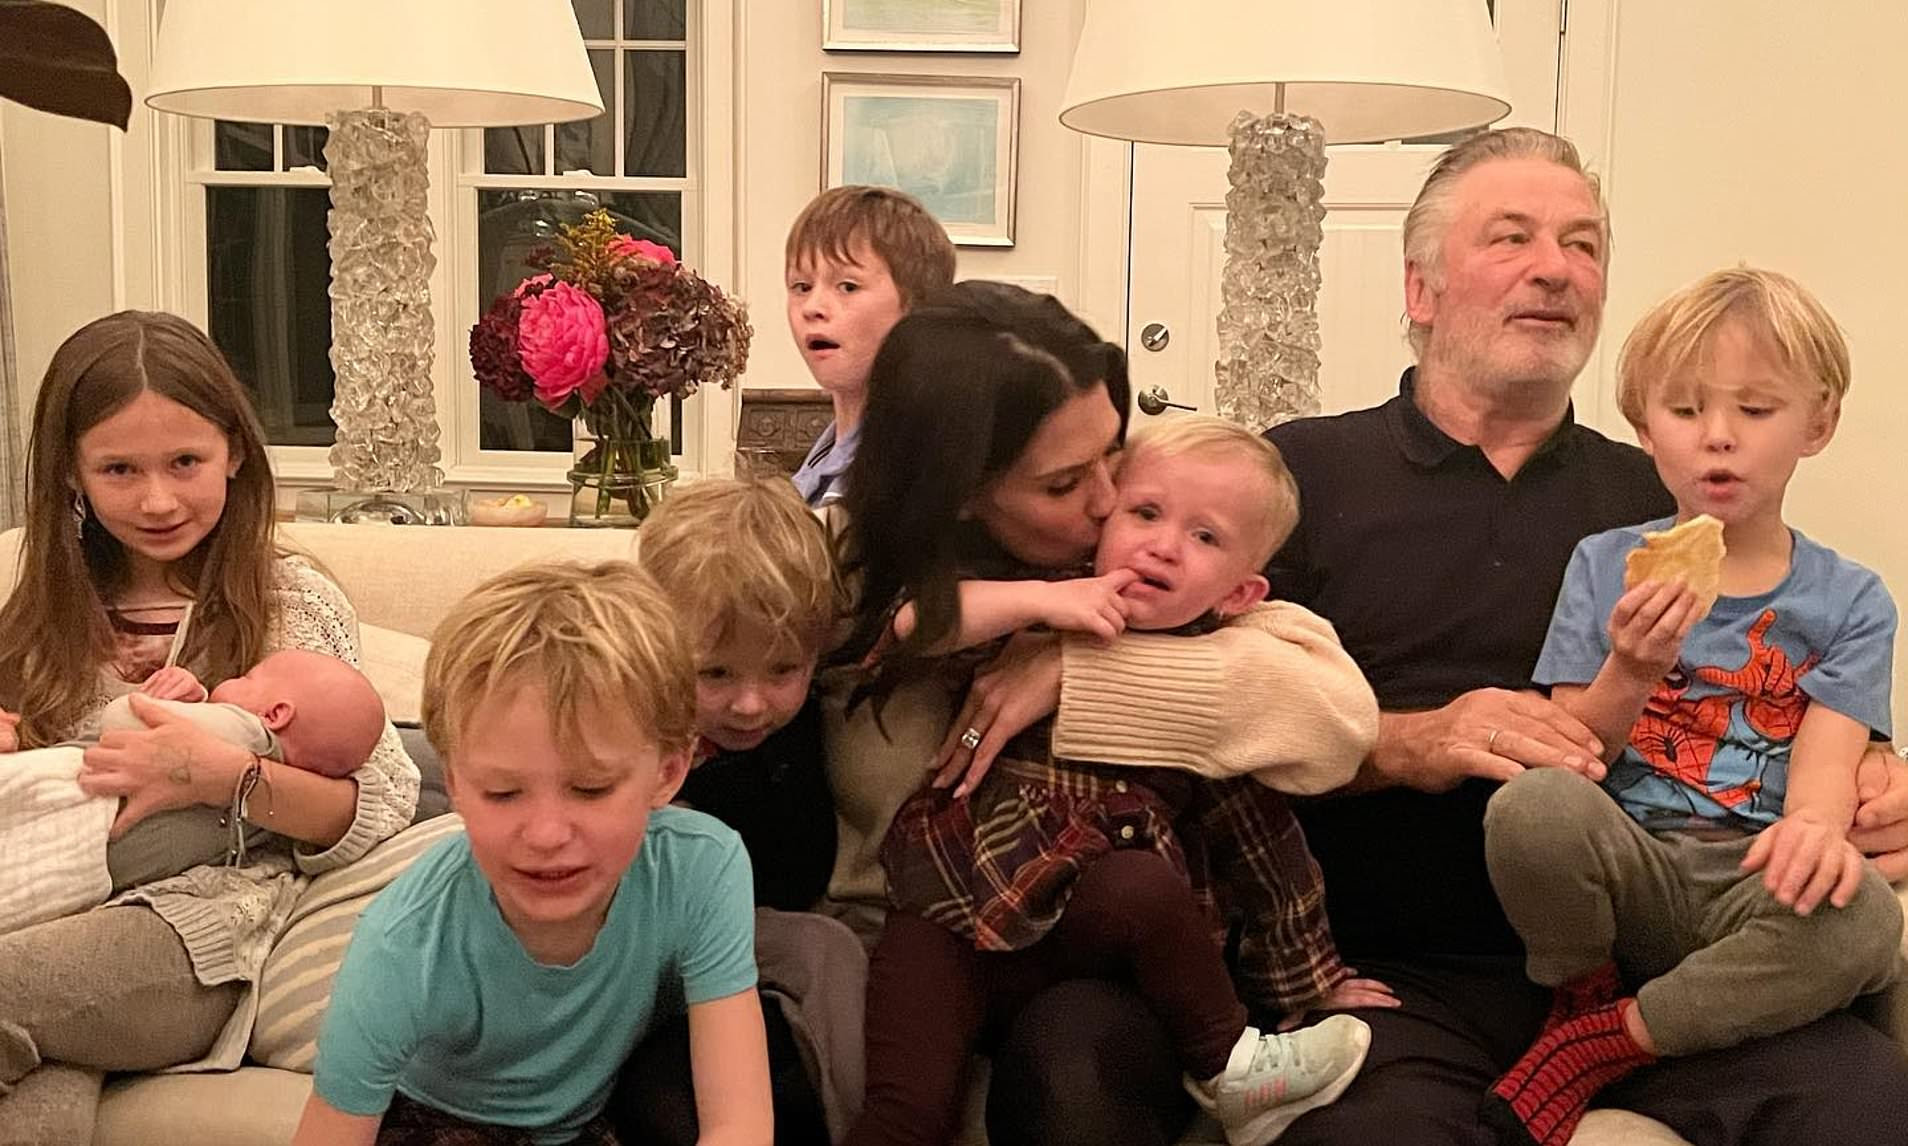 Alec Baldwin and wife Hilaria share a snap including all seven of their kids for Thanksgiving